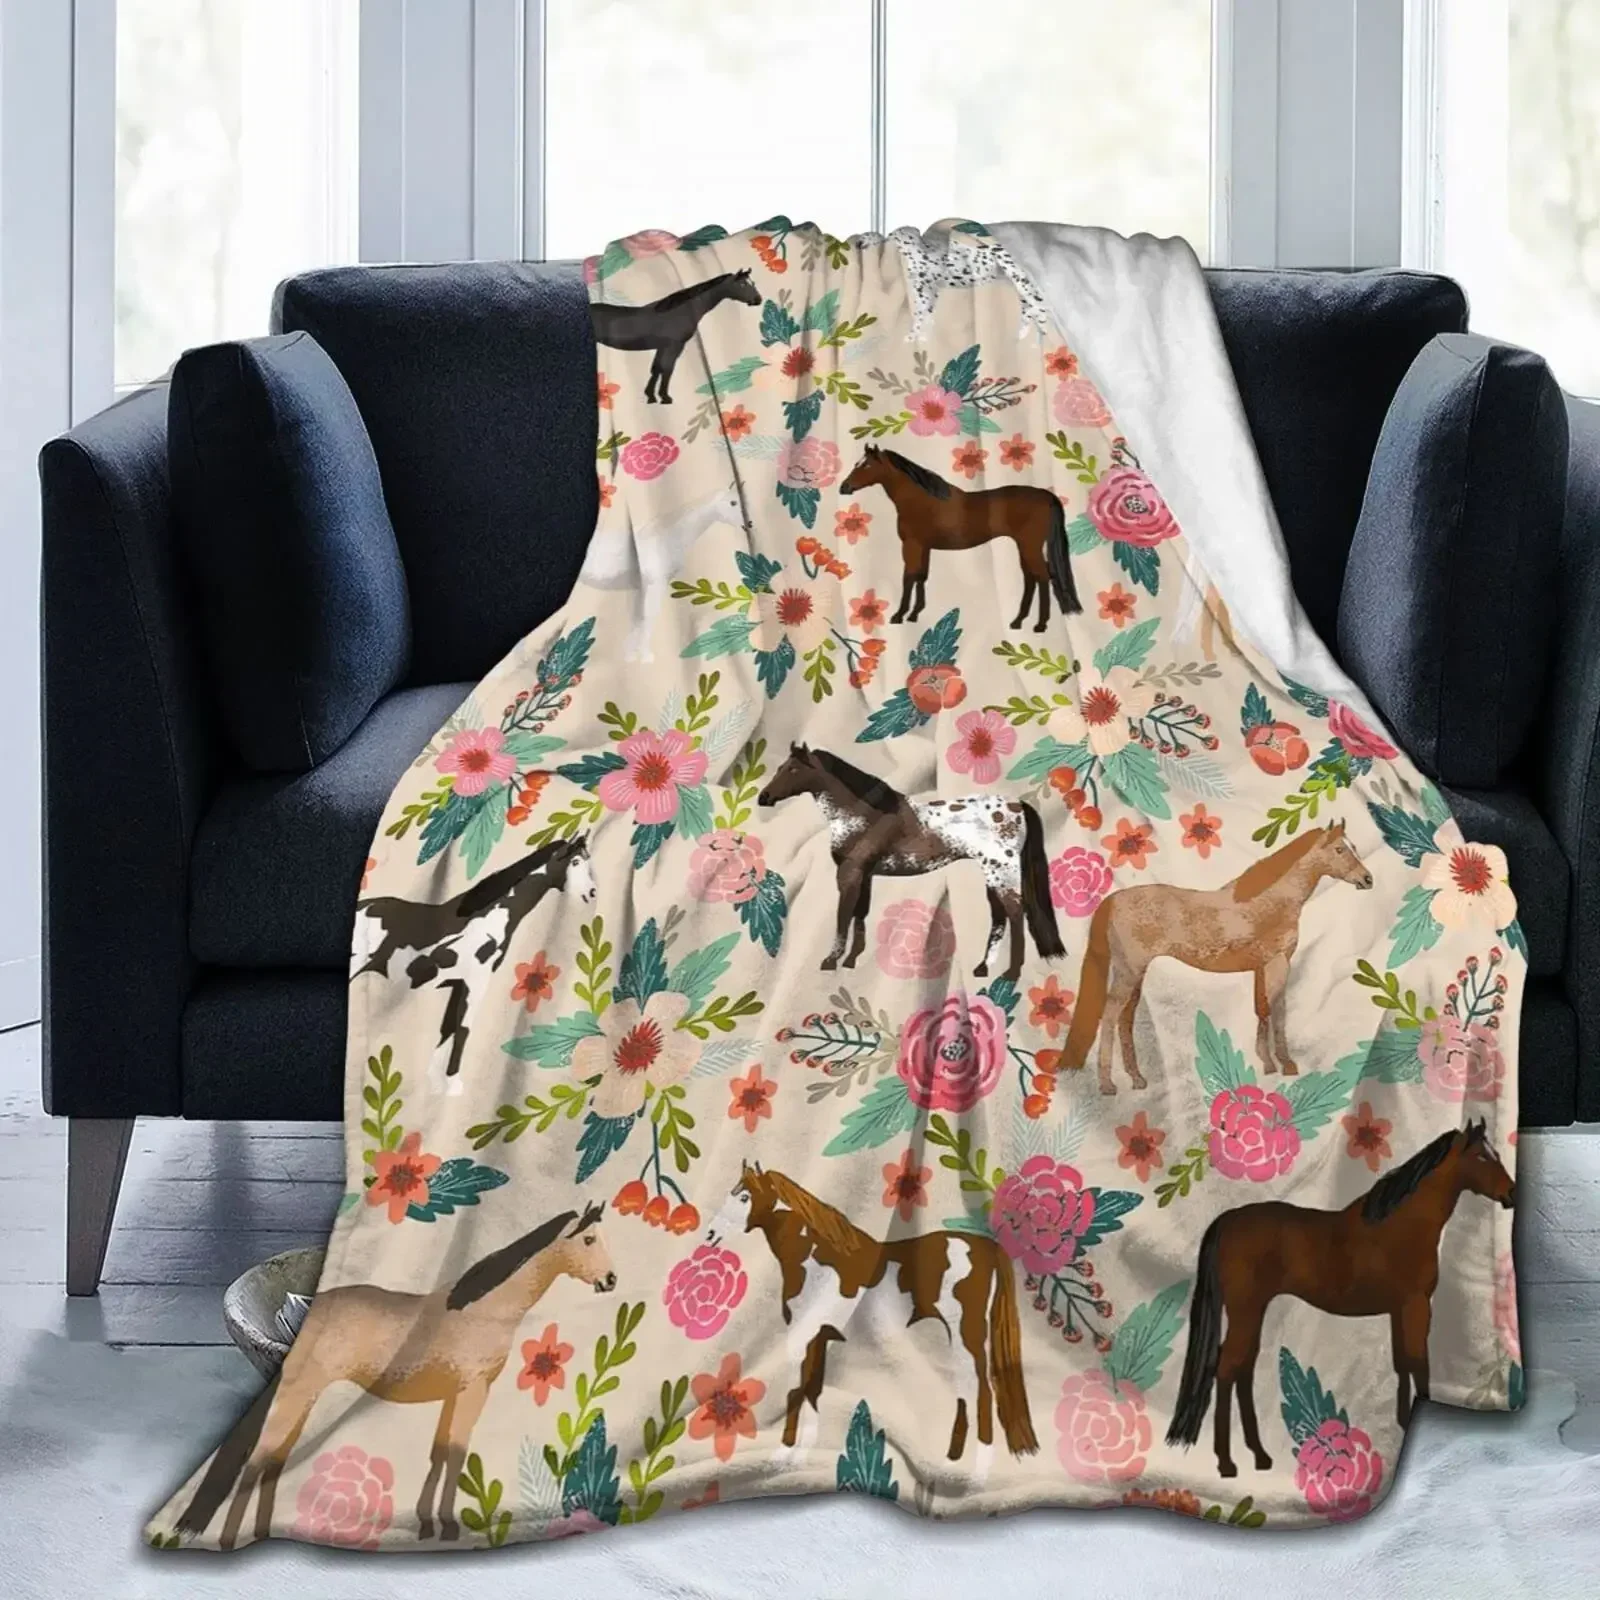 

Horse Printed Flannel Blanket Fashion Bed Sofa Air Conditioning Fashionable Leisure Picnic Travel Napping Customizable Throw